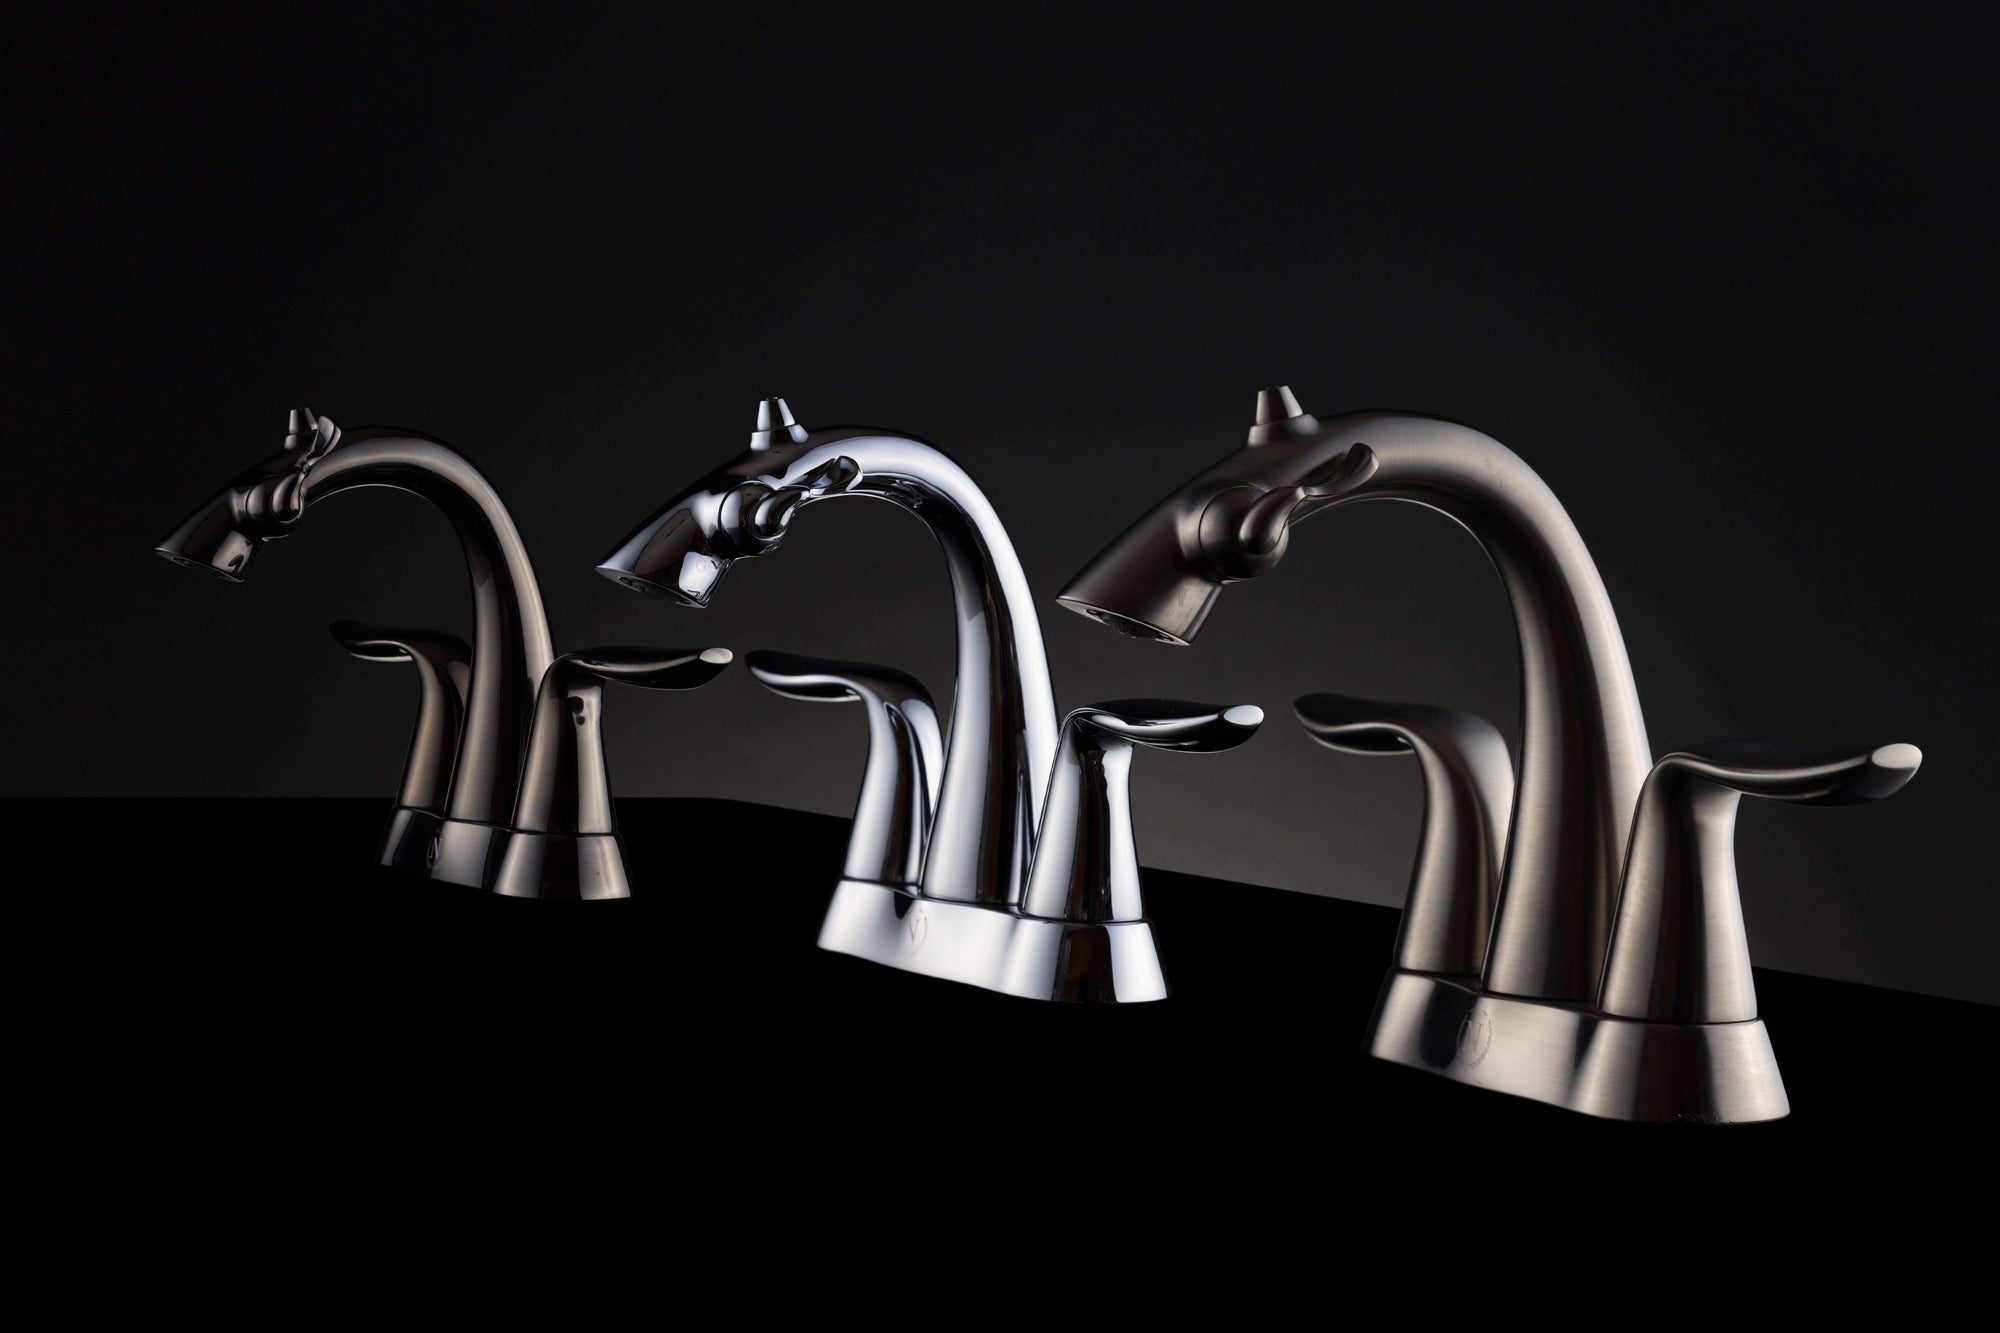 Nasoni fountain faucets are the most award-winning faucet ever, and the future of faucets.